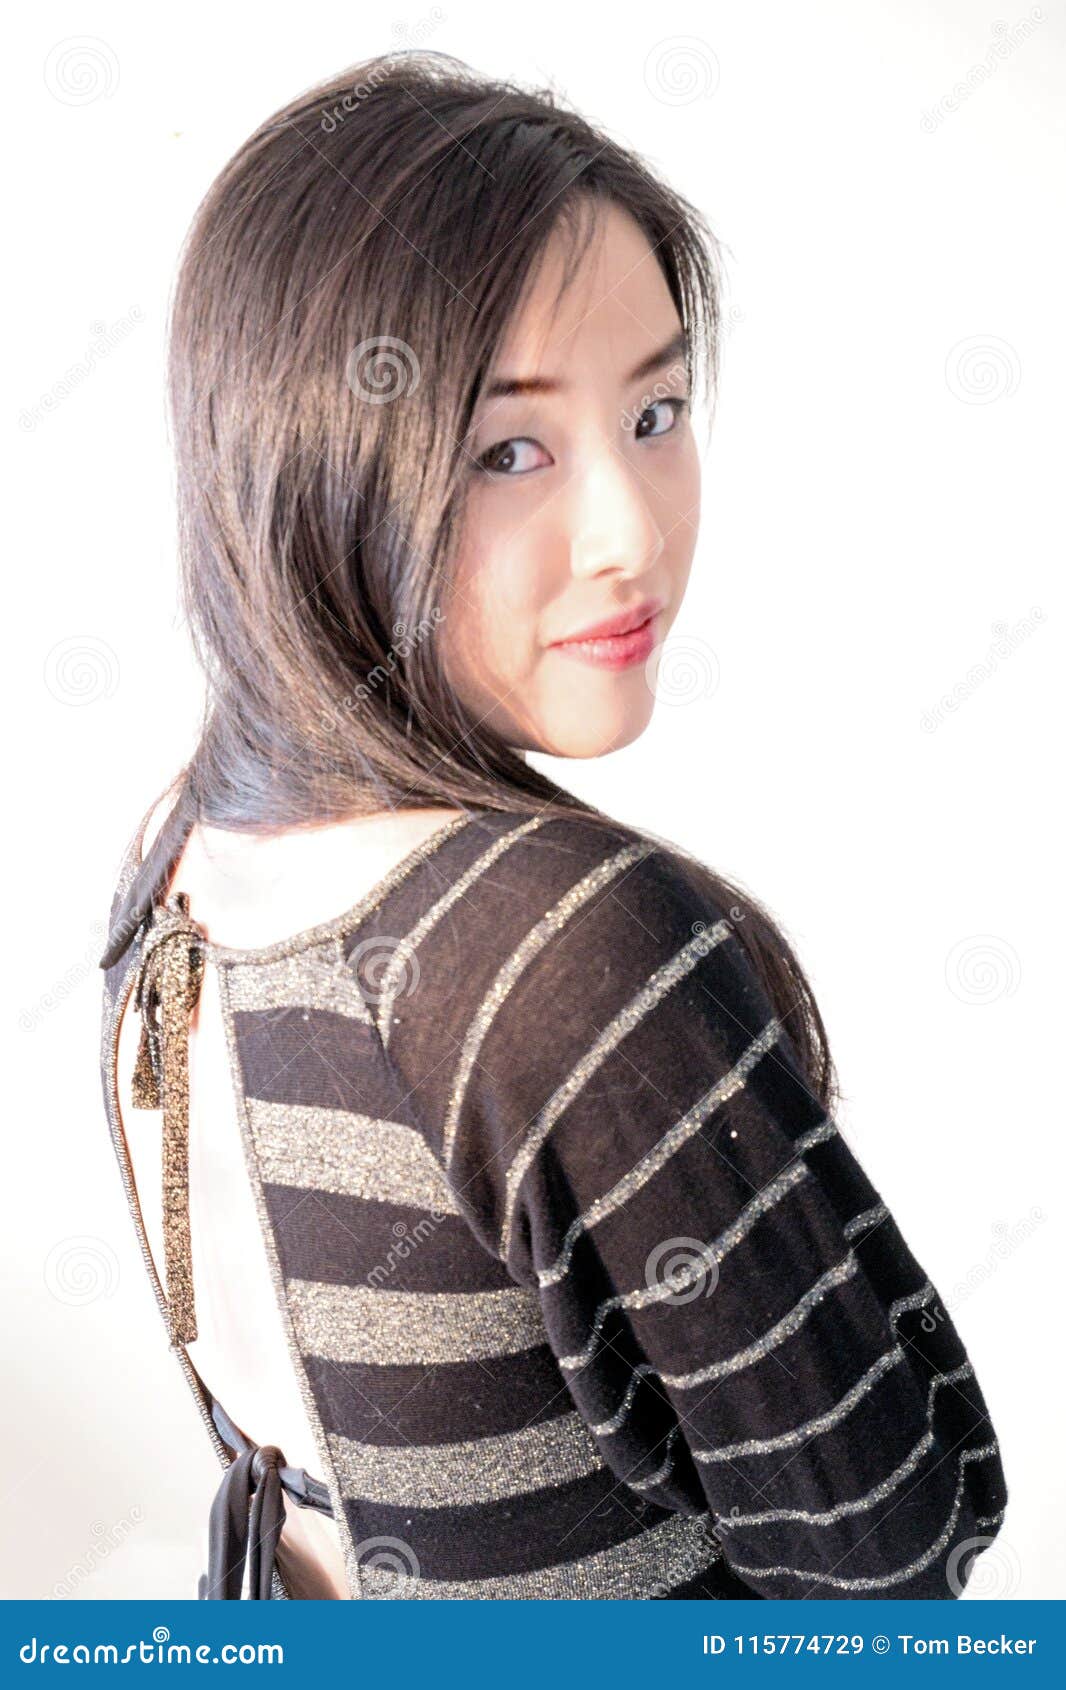 Smiling Young Woman Looks Back Over Her Shoulder Stock Image - Image of ...